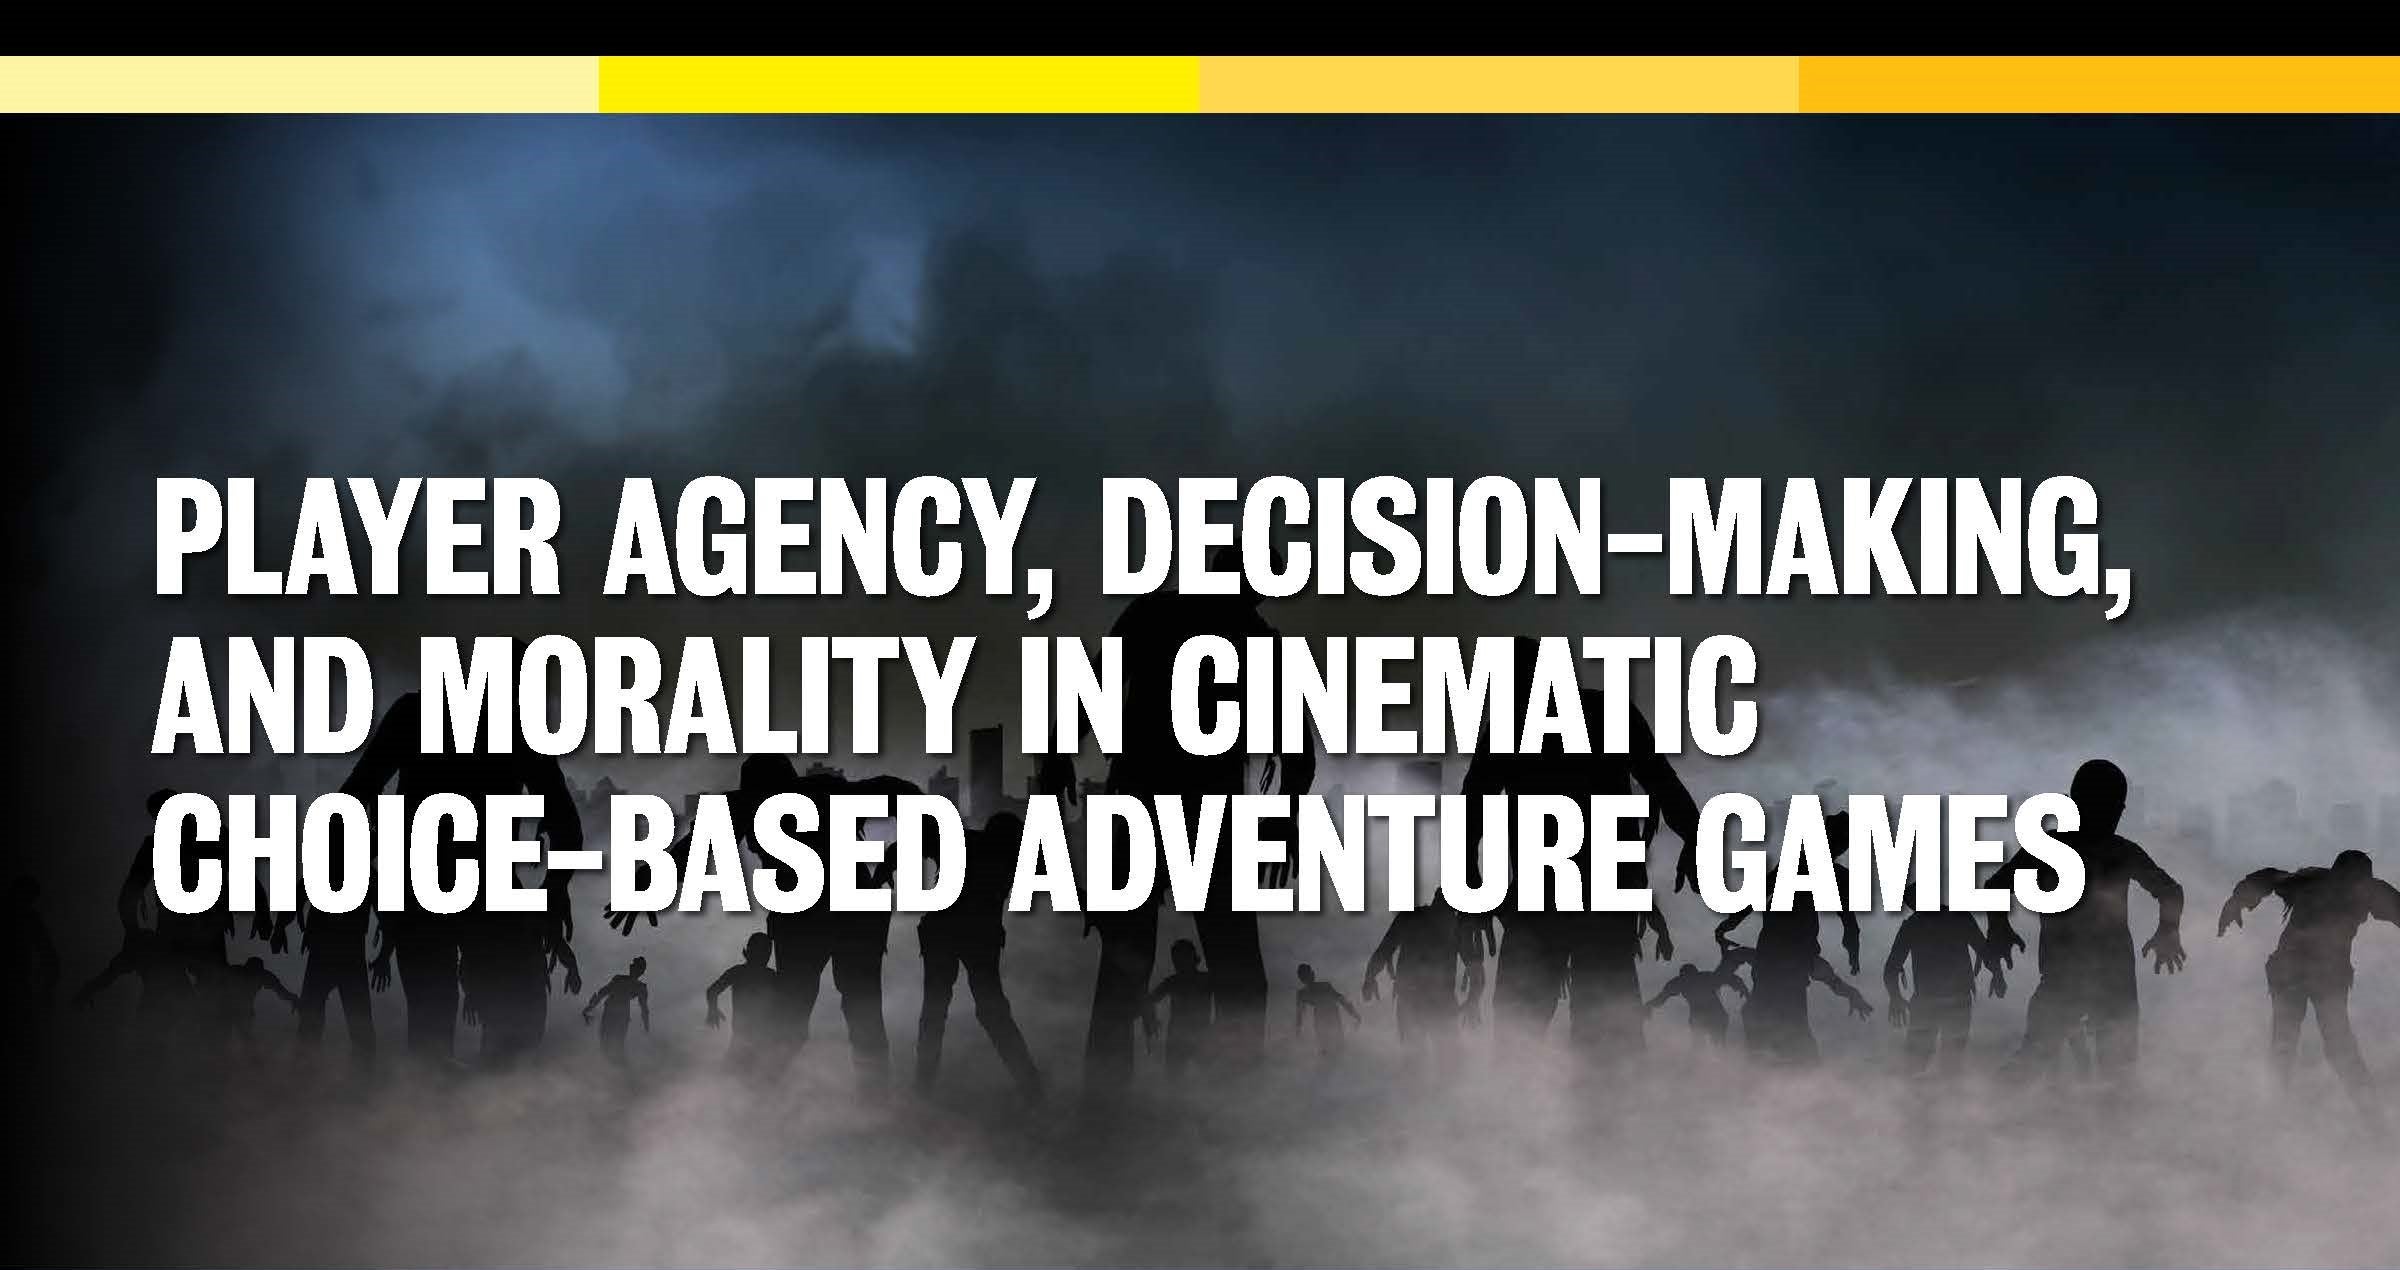 Player Agency Decision-Making and Moraality in Cinematic Choice-Based Adventure Games poster title; zombie hoard background